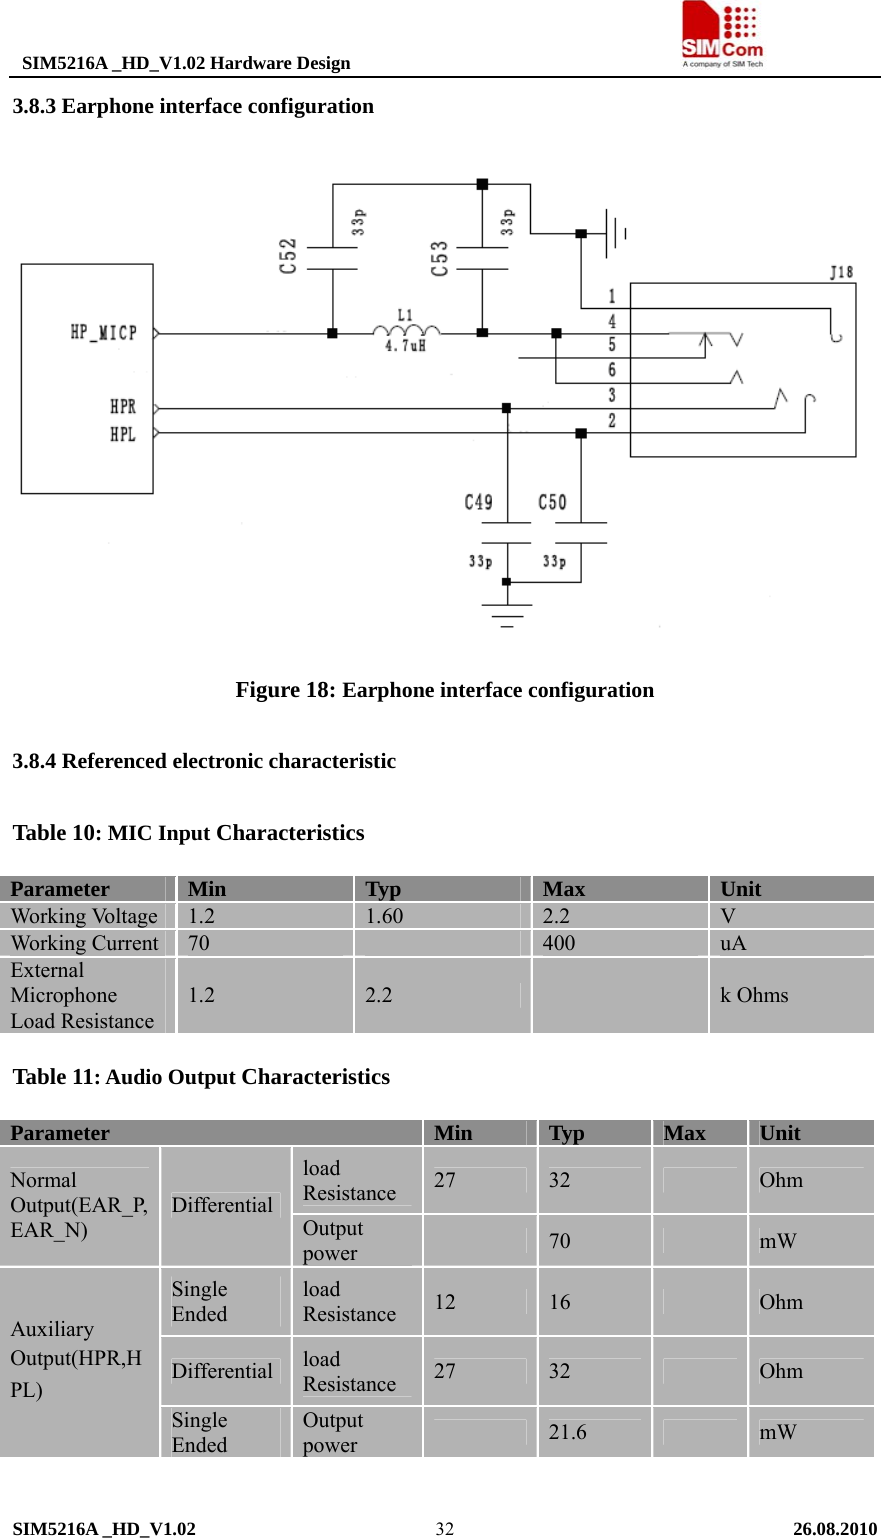  SIM5216A _HD_V1.02 Hardware Design                                     SIM5216A _HD_V1.02   26.08.2010   323.8.3 Earphone interface configuration  Figure 18: Earphone interface configuration 3.8.4 Referenced electronic characteristic Table 10: MIC Input Characteristics Parameter  Min  Typ  Max  Unit Working Voltage  1.2  1.60  2.2  V Working Current  70   400  uA External Microphone Load Resistance 1.2  2.2   k Ohms Table 11: Audio Output Characteristics Parameter  Min  Typ  Max  Unit load Resistance  27  32   Ohm Normal Output(EAR_P,EAR_N) Differential Output power   70   mW Single Ended  load Resistance  12  16   Ohm Differential  load Resistance  27  32   Ohm Auxiliary Output(HPR,HPL) Single Ended Output power   21.6   mW  